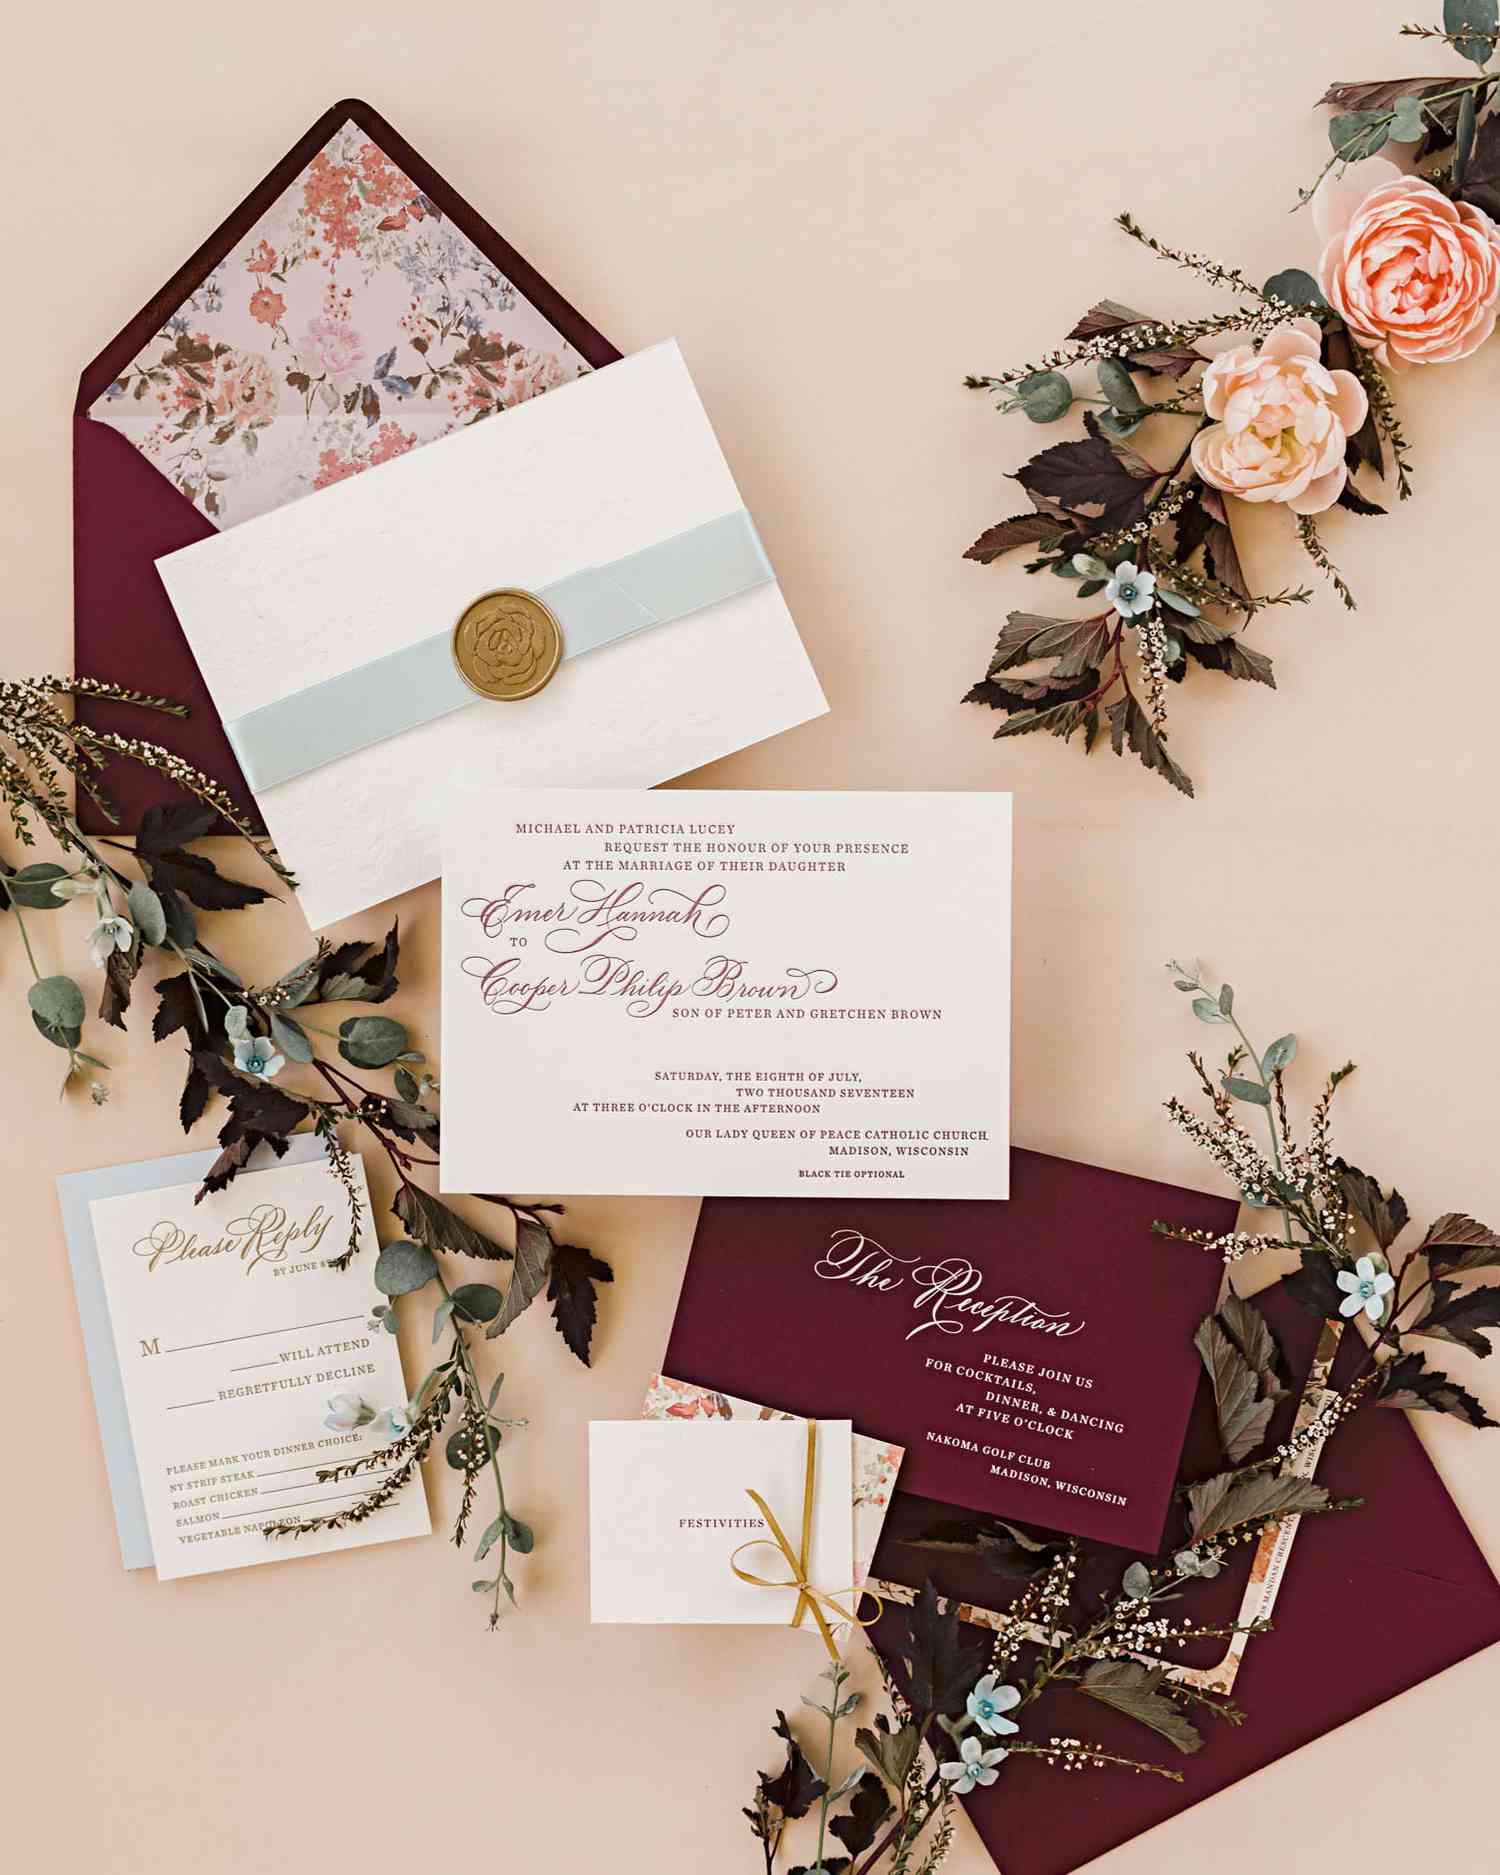 A Floral-Themed Invitation